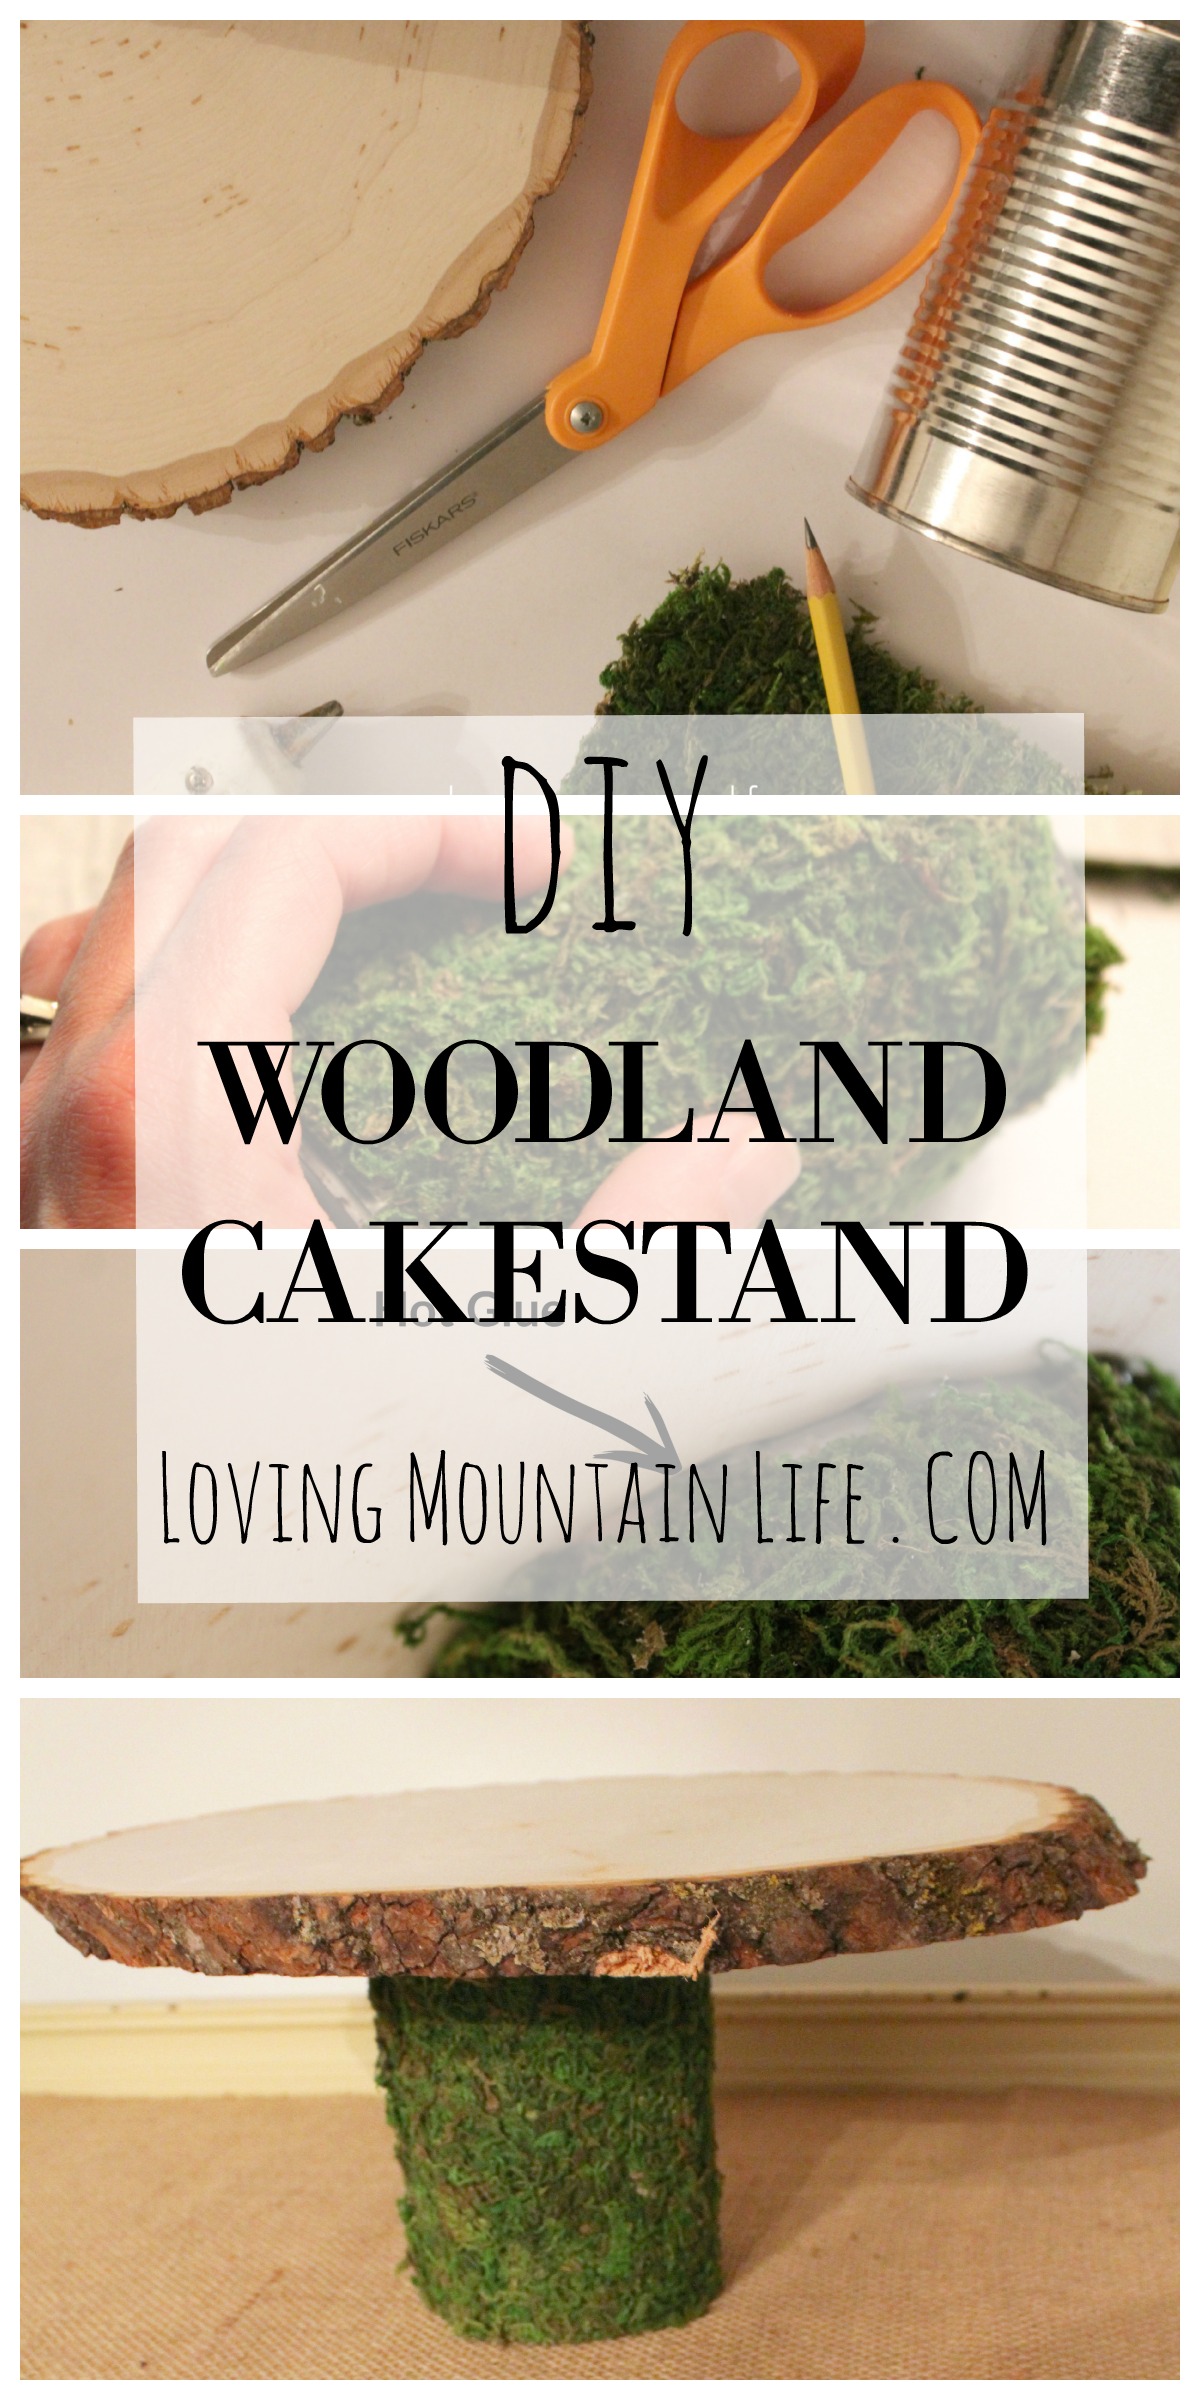 DIY Woodland Cakestand with step by step instructions from Loving Mountain Life